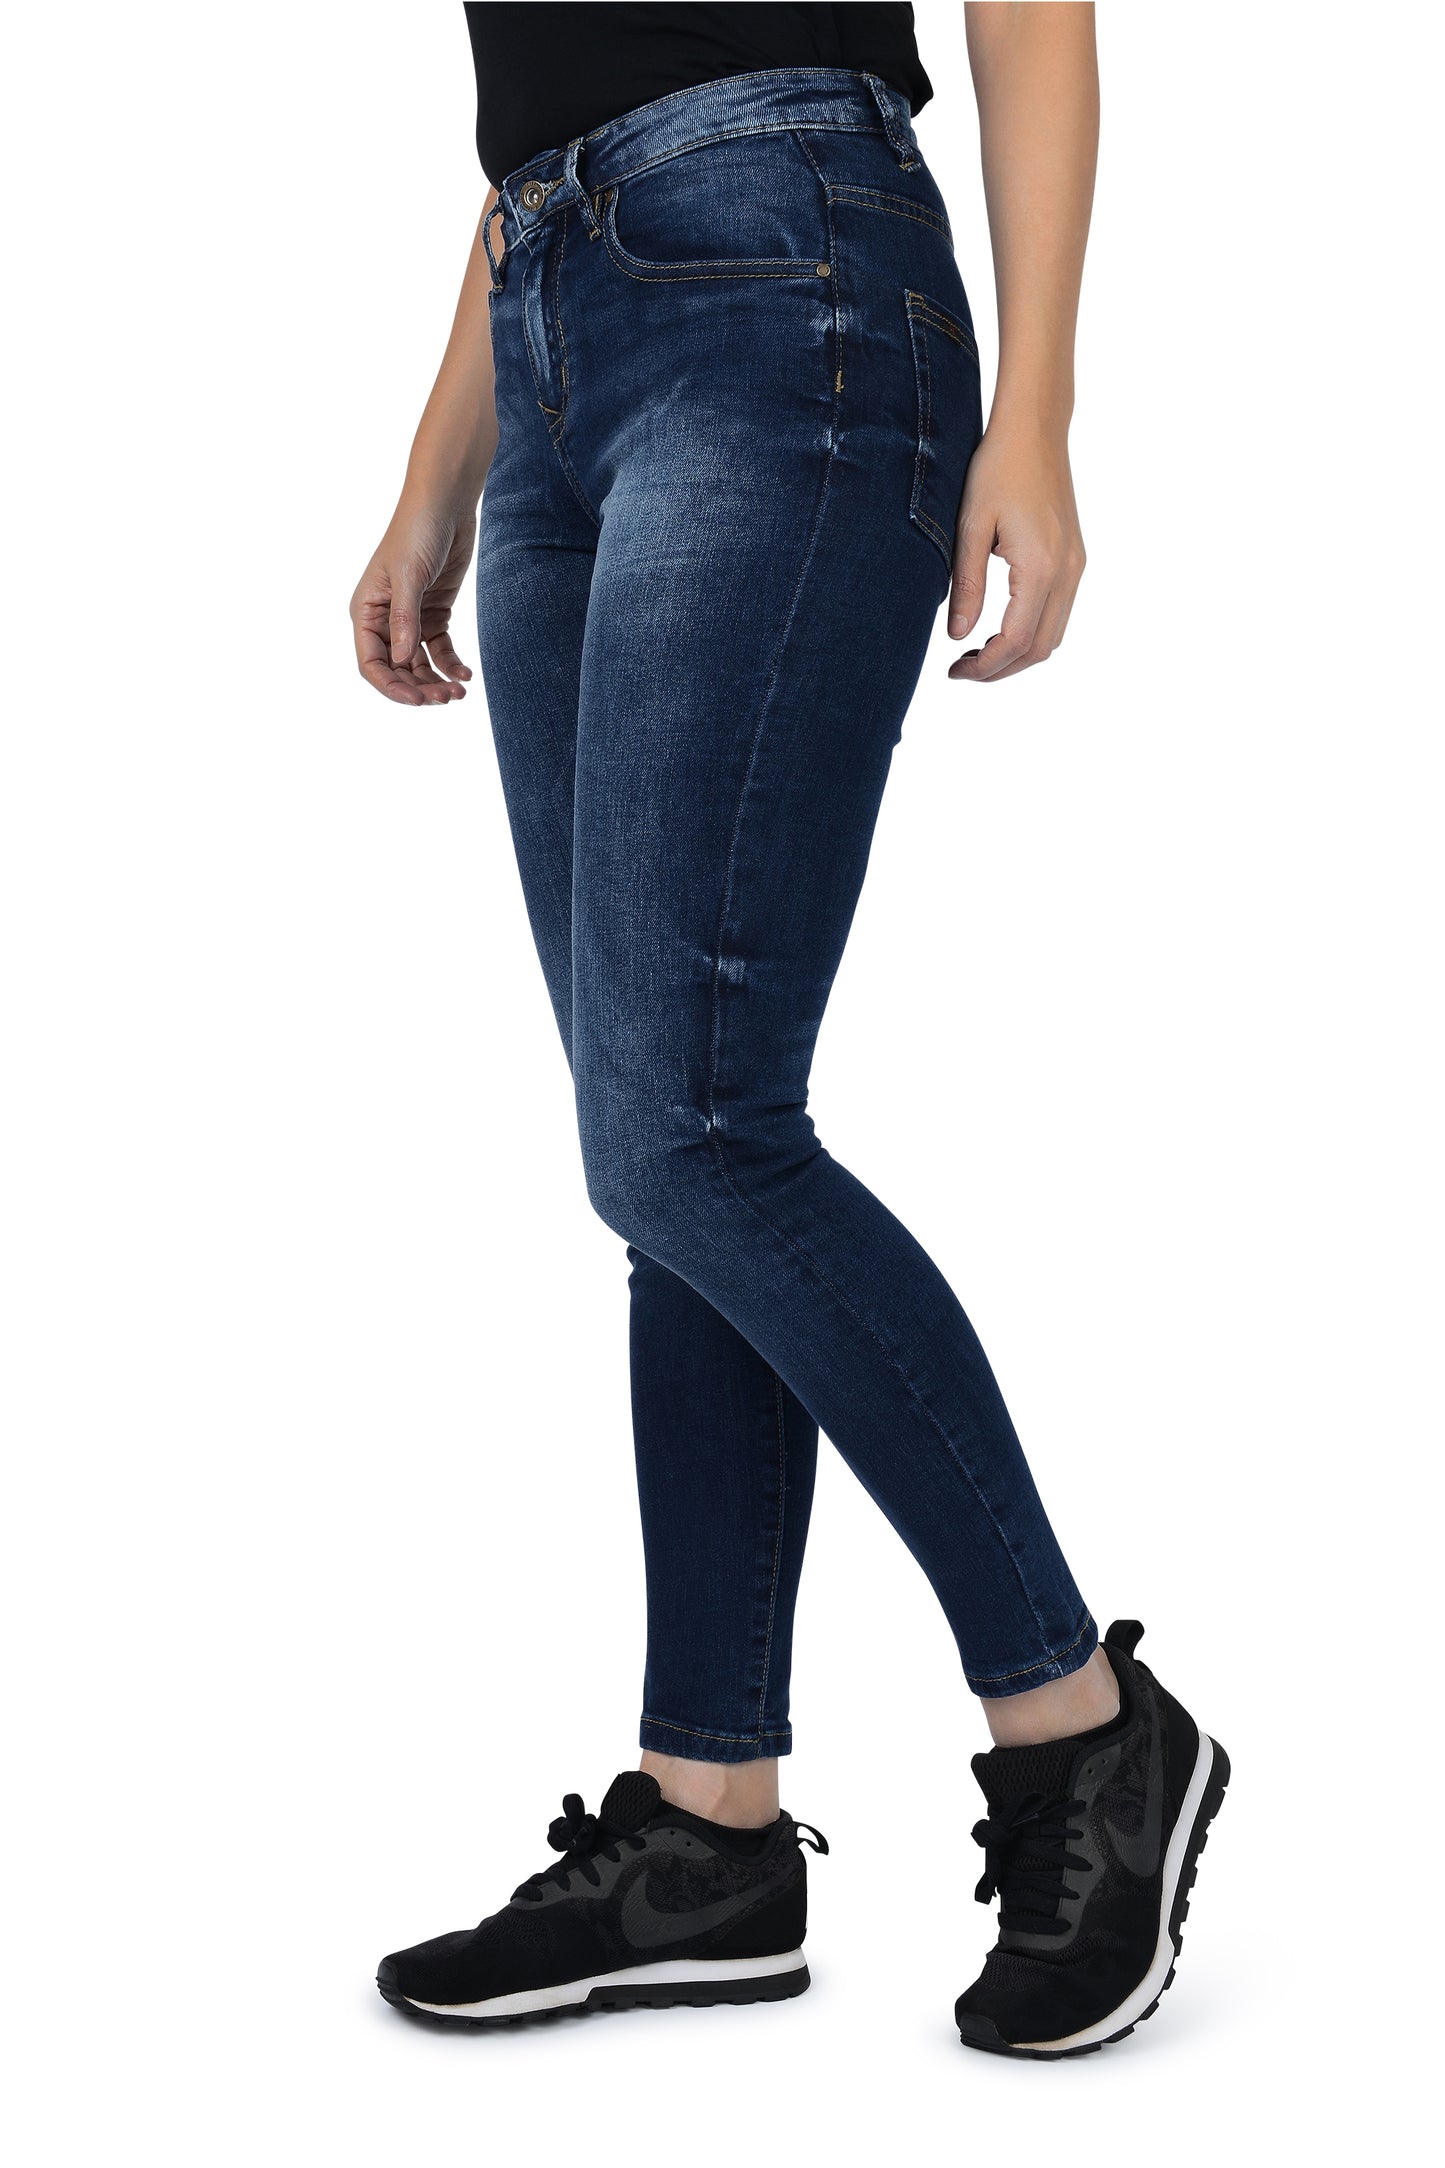 Mid Rise Skinny Fit Jeans - Deep Blue - jeans for women